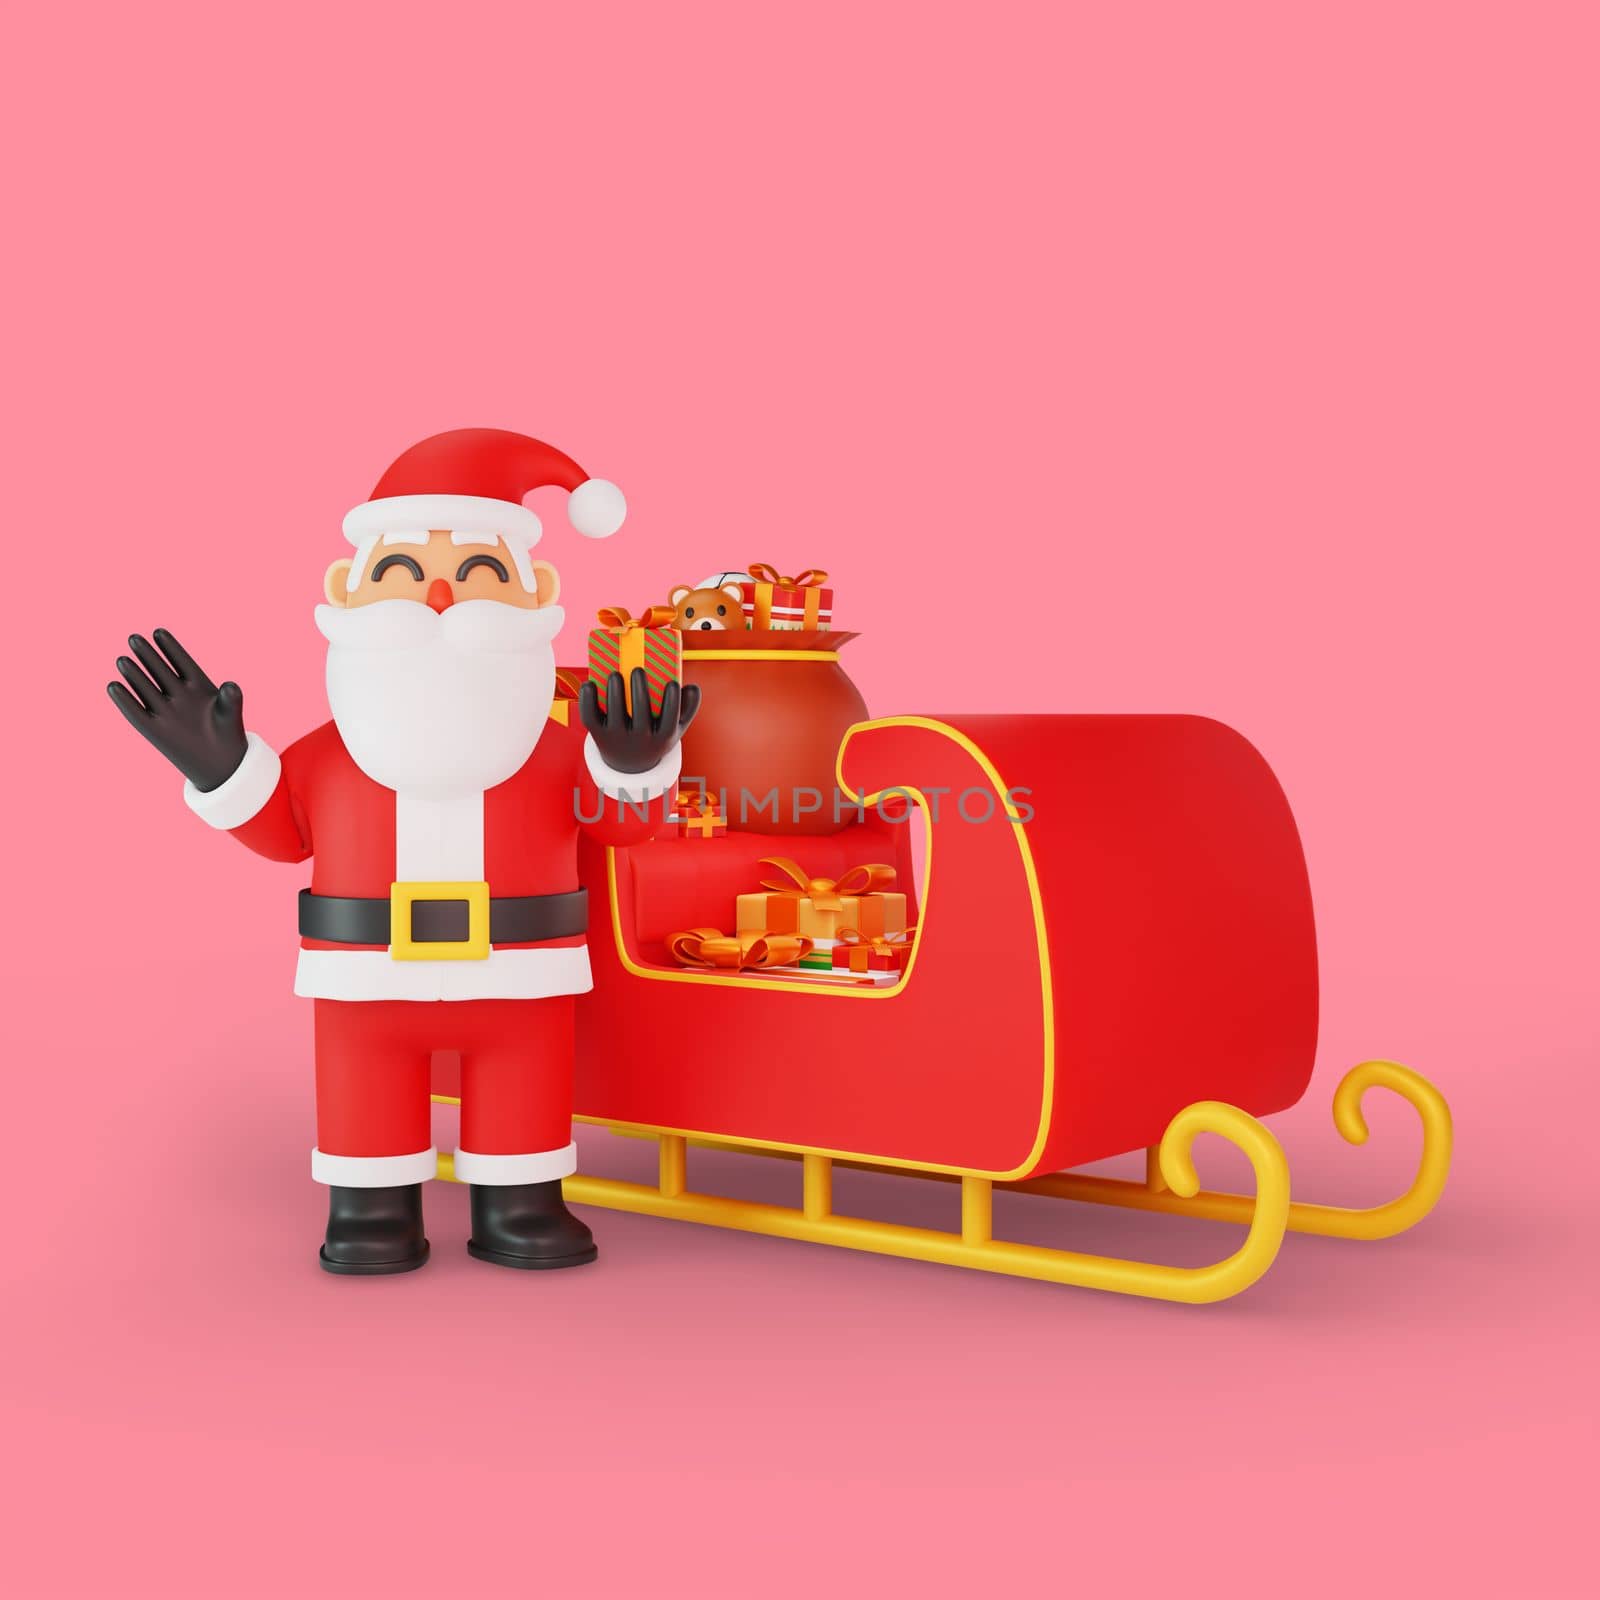 3d rendering of santa pose in front of a sleigh filled with gifts